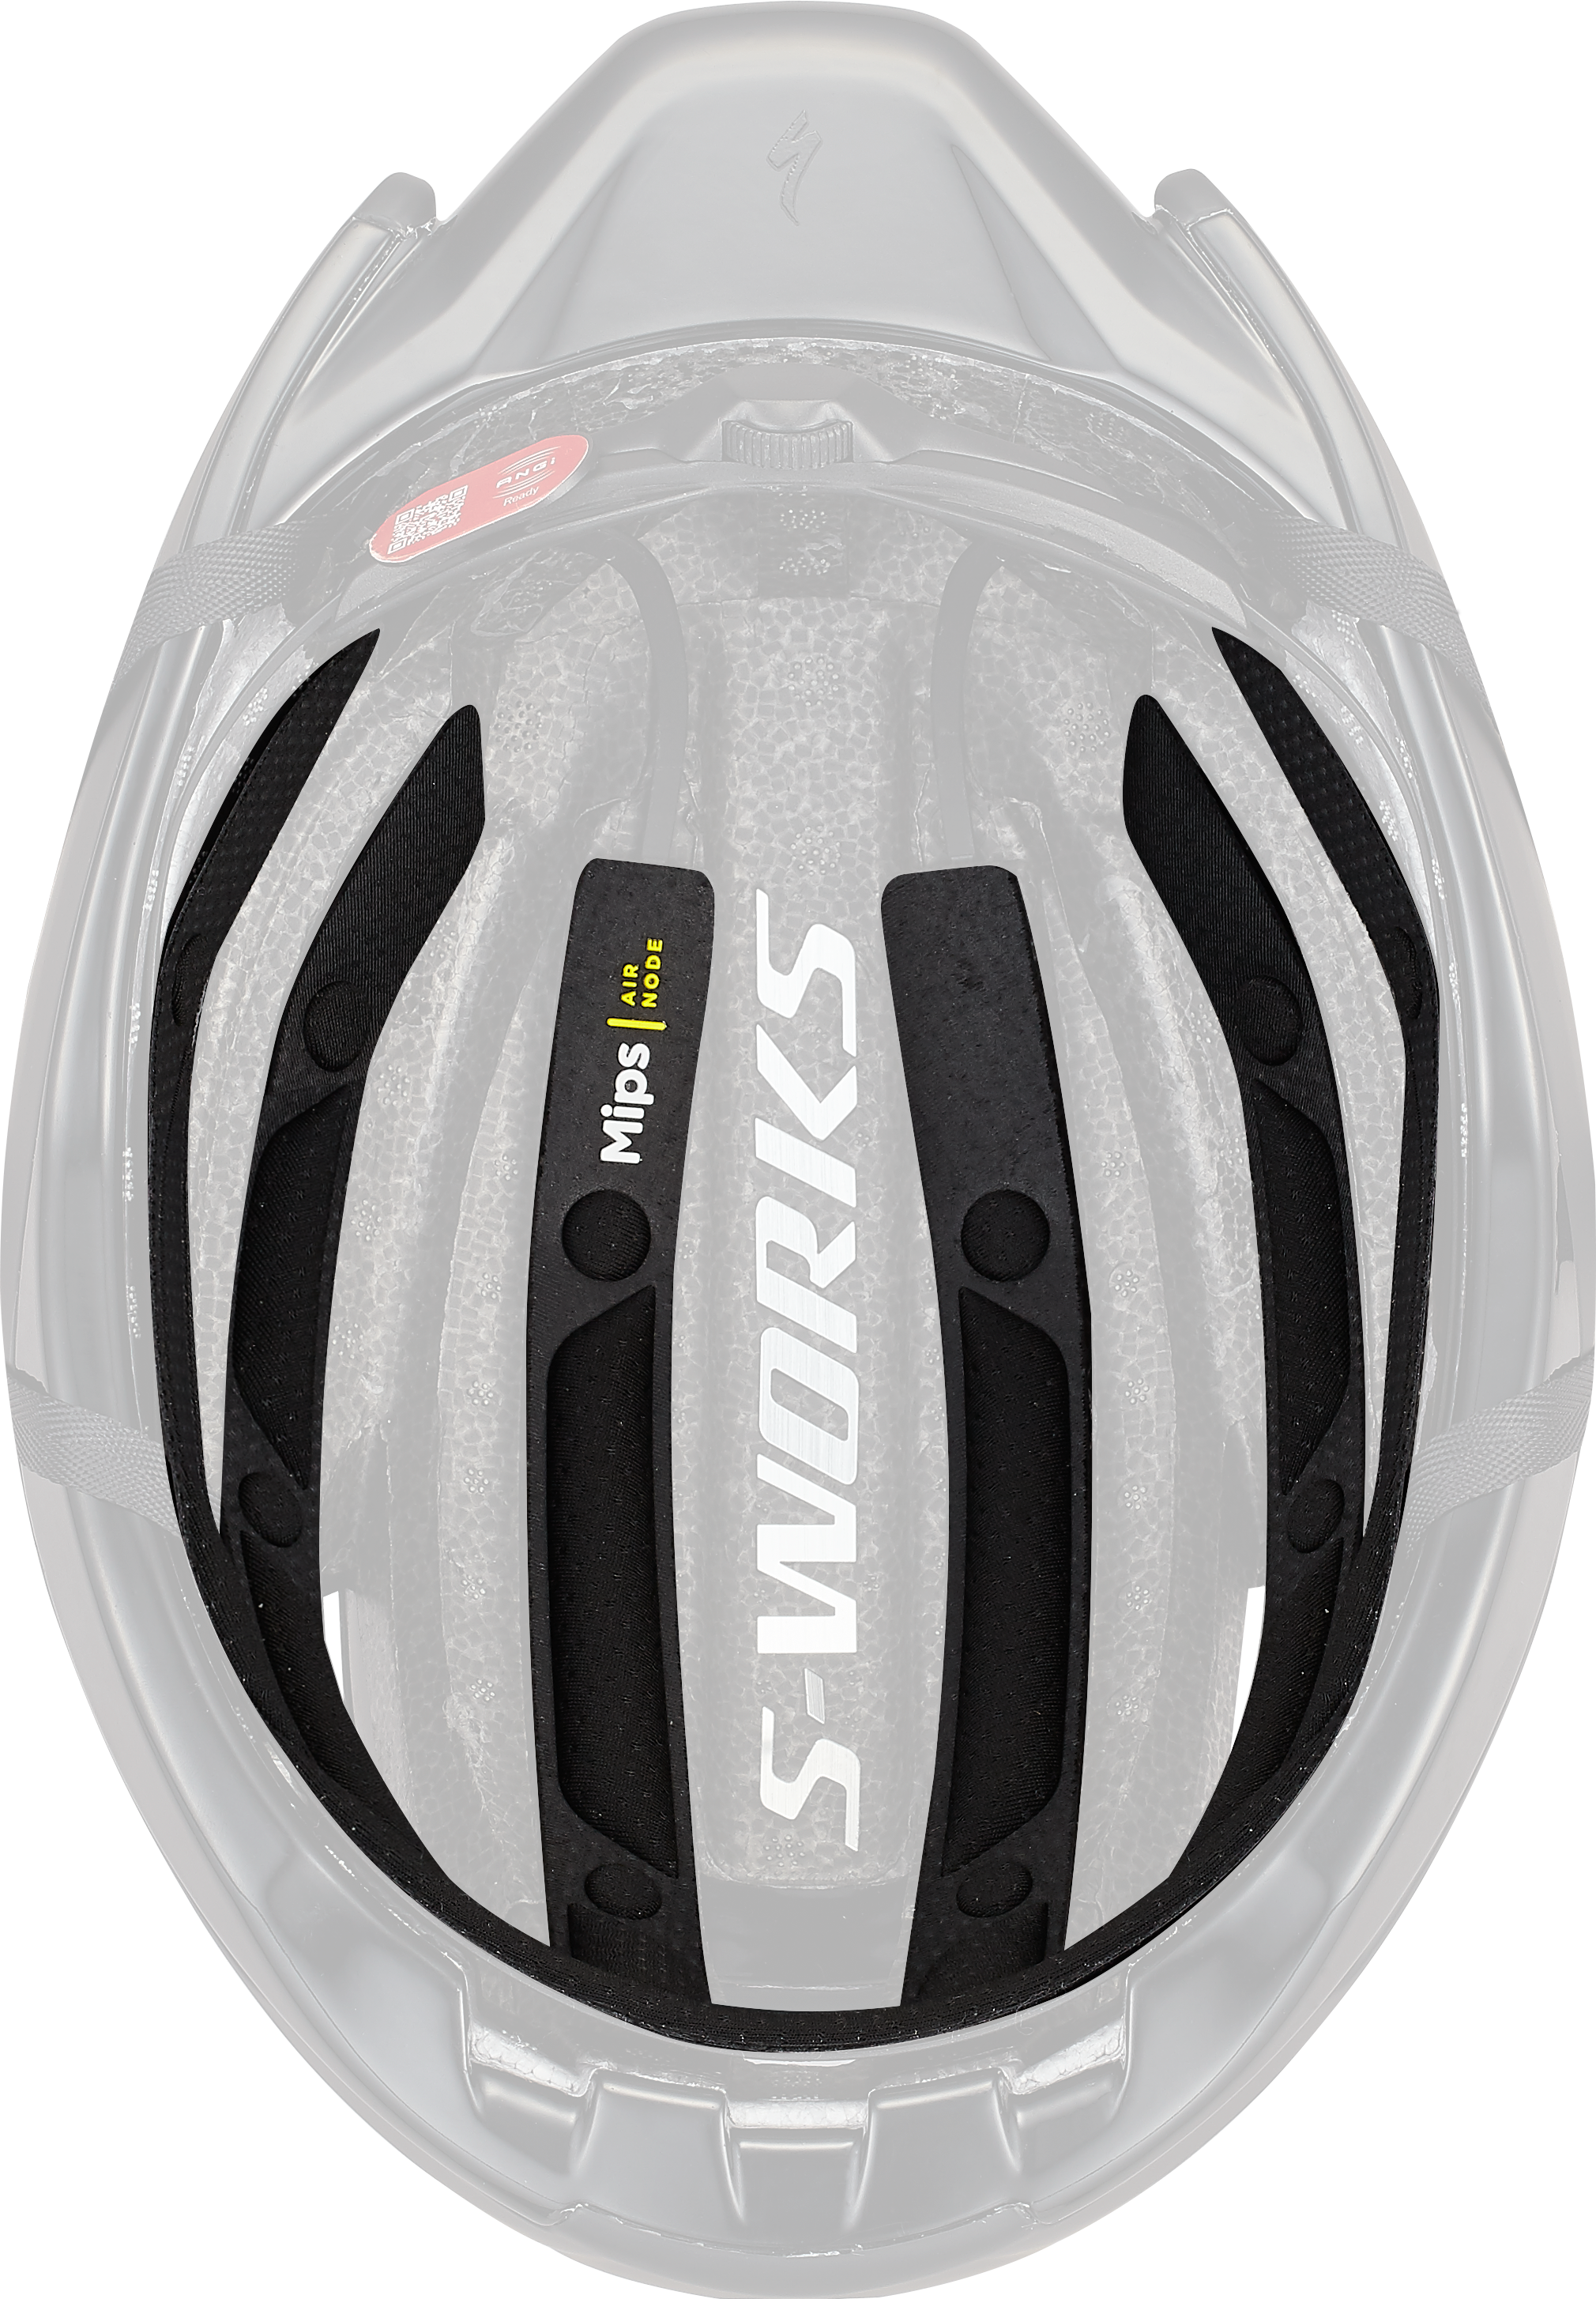 S-WORKS EVADE 3 REPLACEMENT PADSET